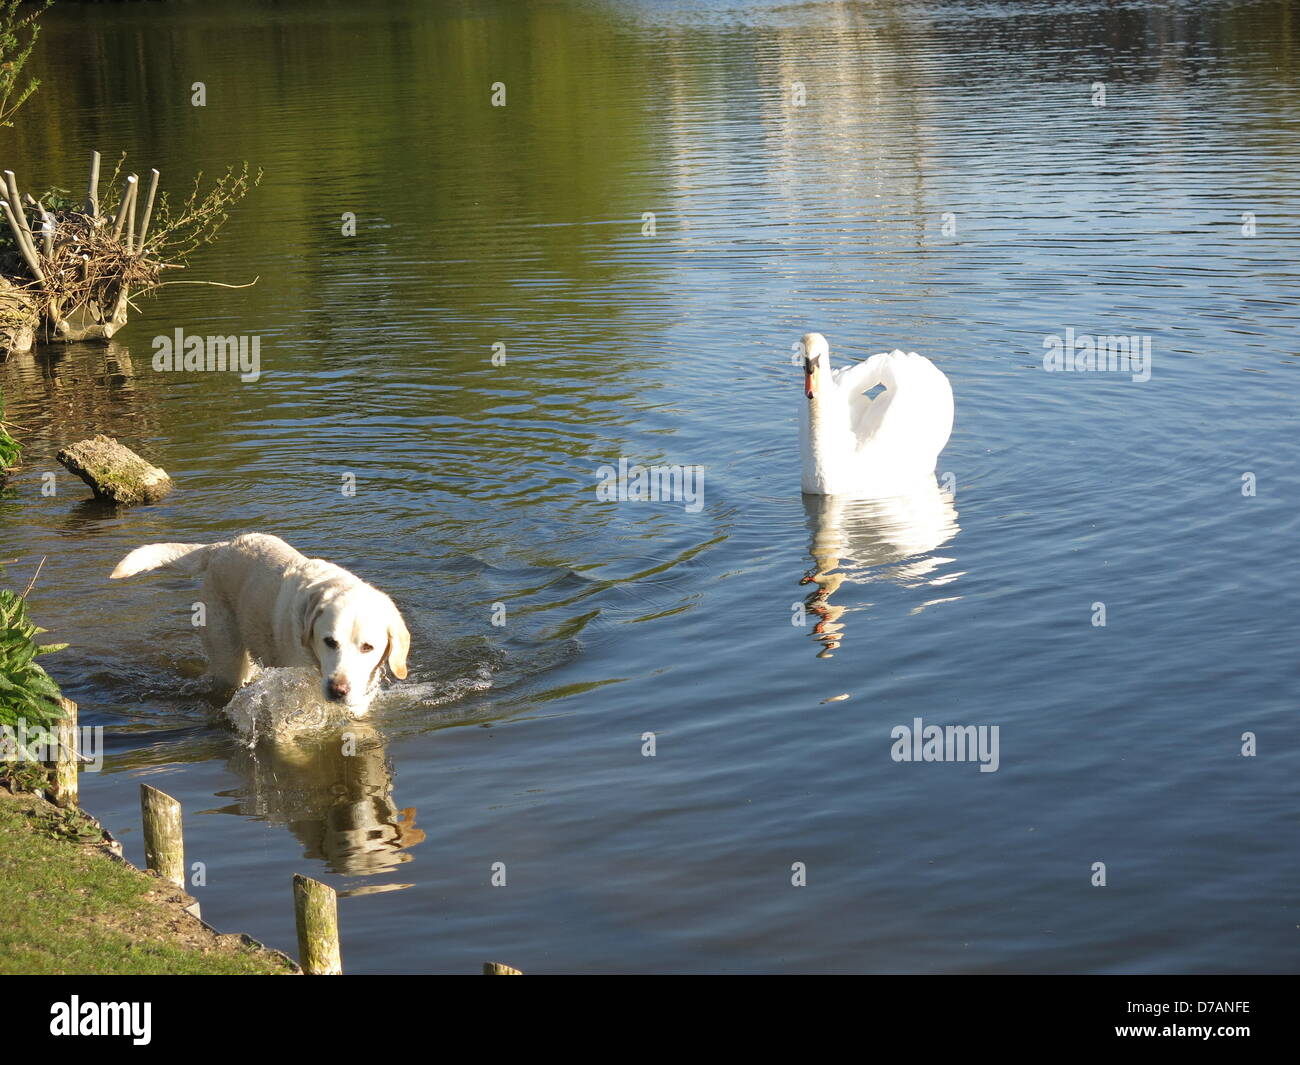 Reading, Berkshire, UK. 2nd May 2013. A dog and a swan enjoying a sunny evening in The River Thames in Reading, Berkshire UK 020513.JPG Credit:  Sarah Tubb / Alamy Live News Stock Photo